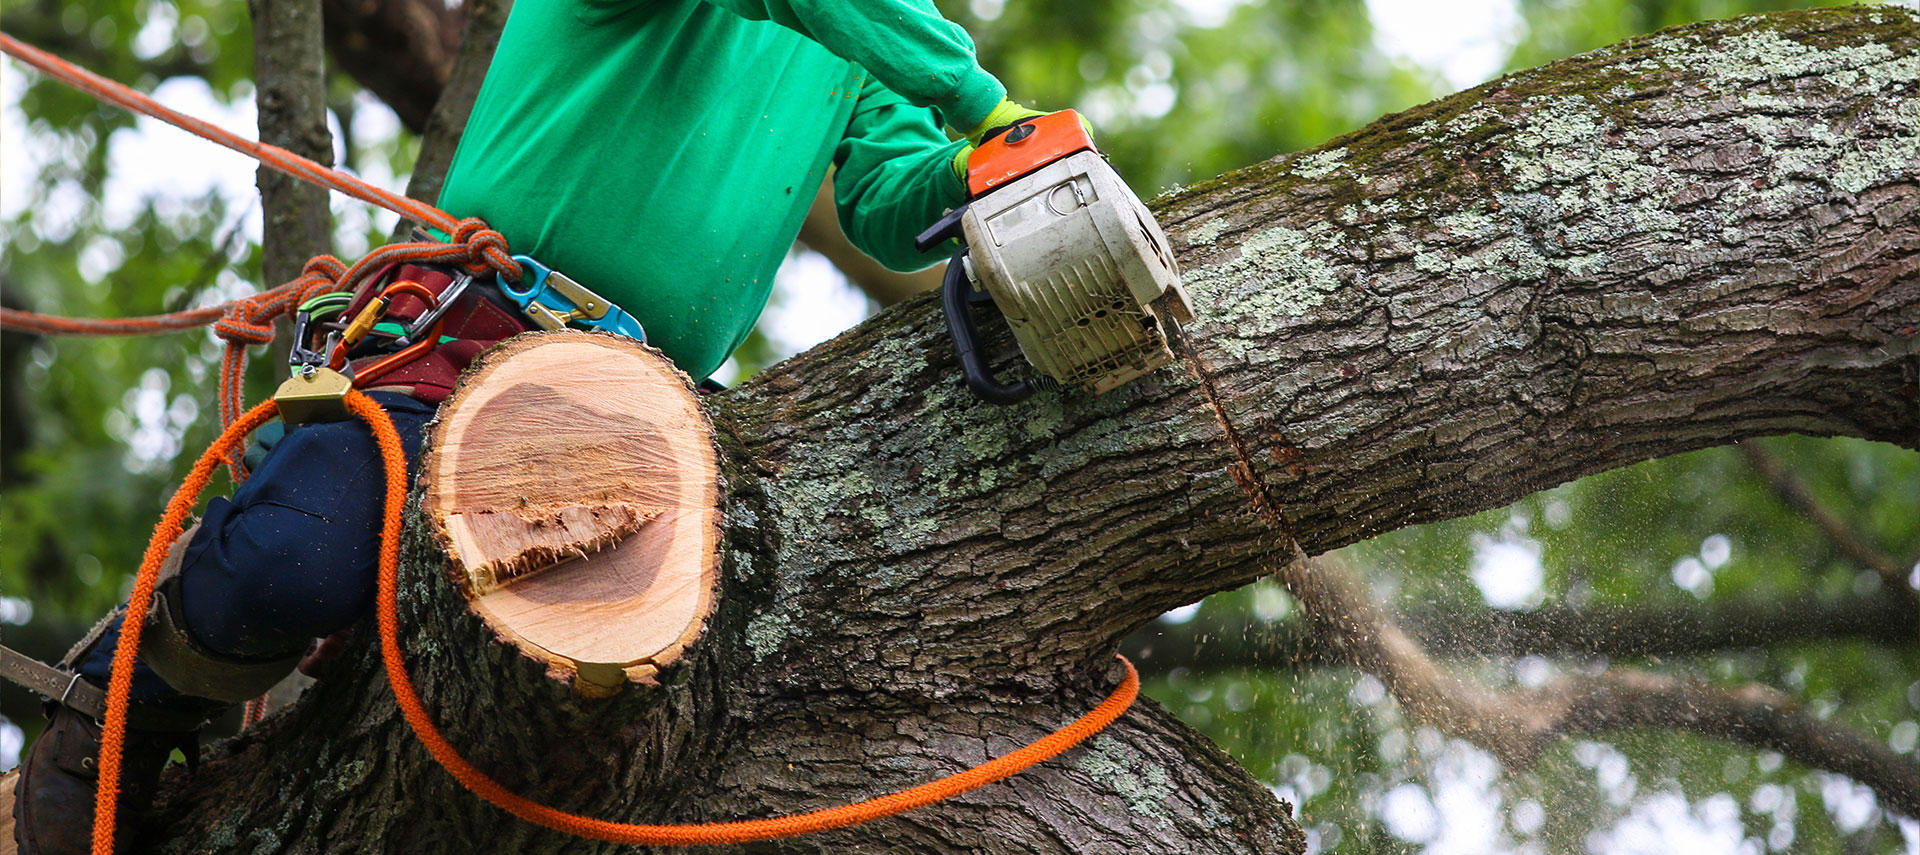 Our Harrison TN professional tree service takes apart trees bit by bit from the top down.
